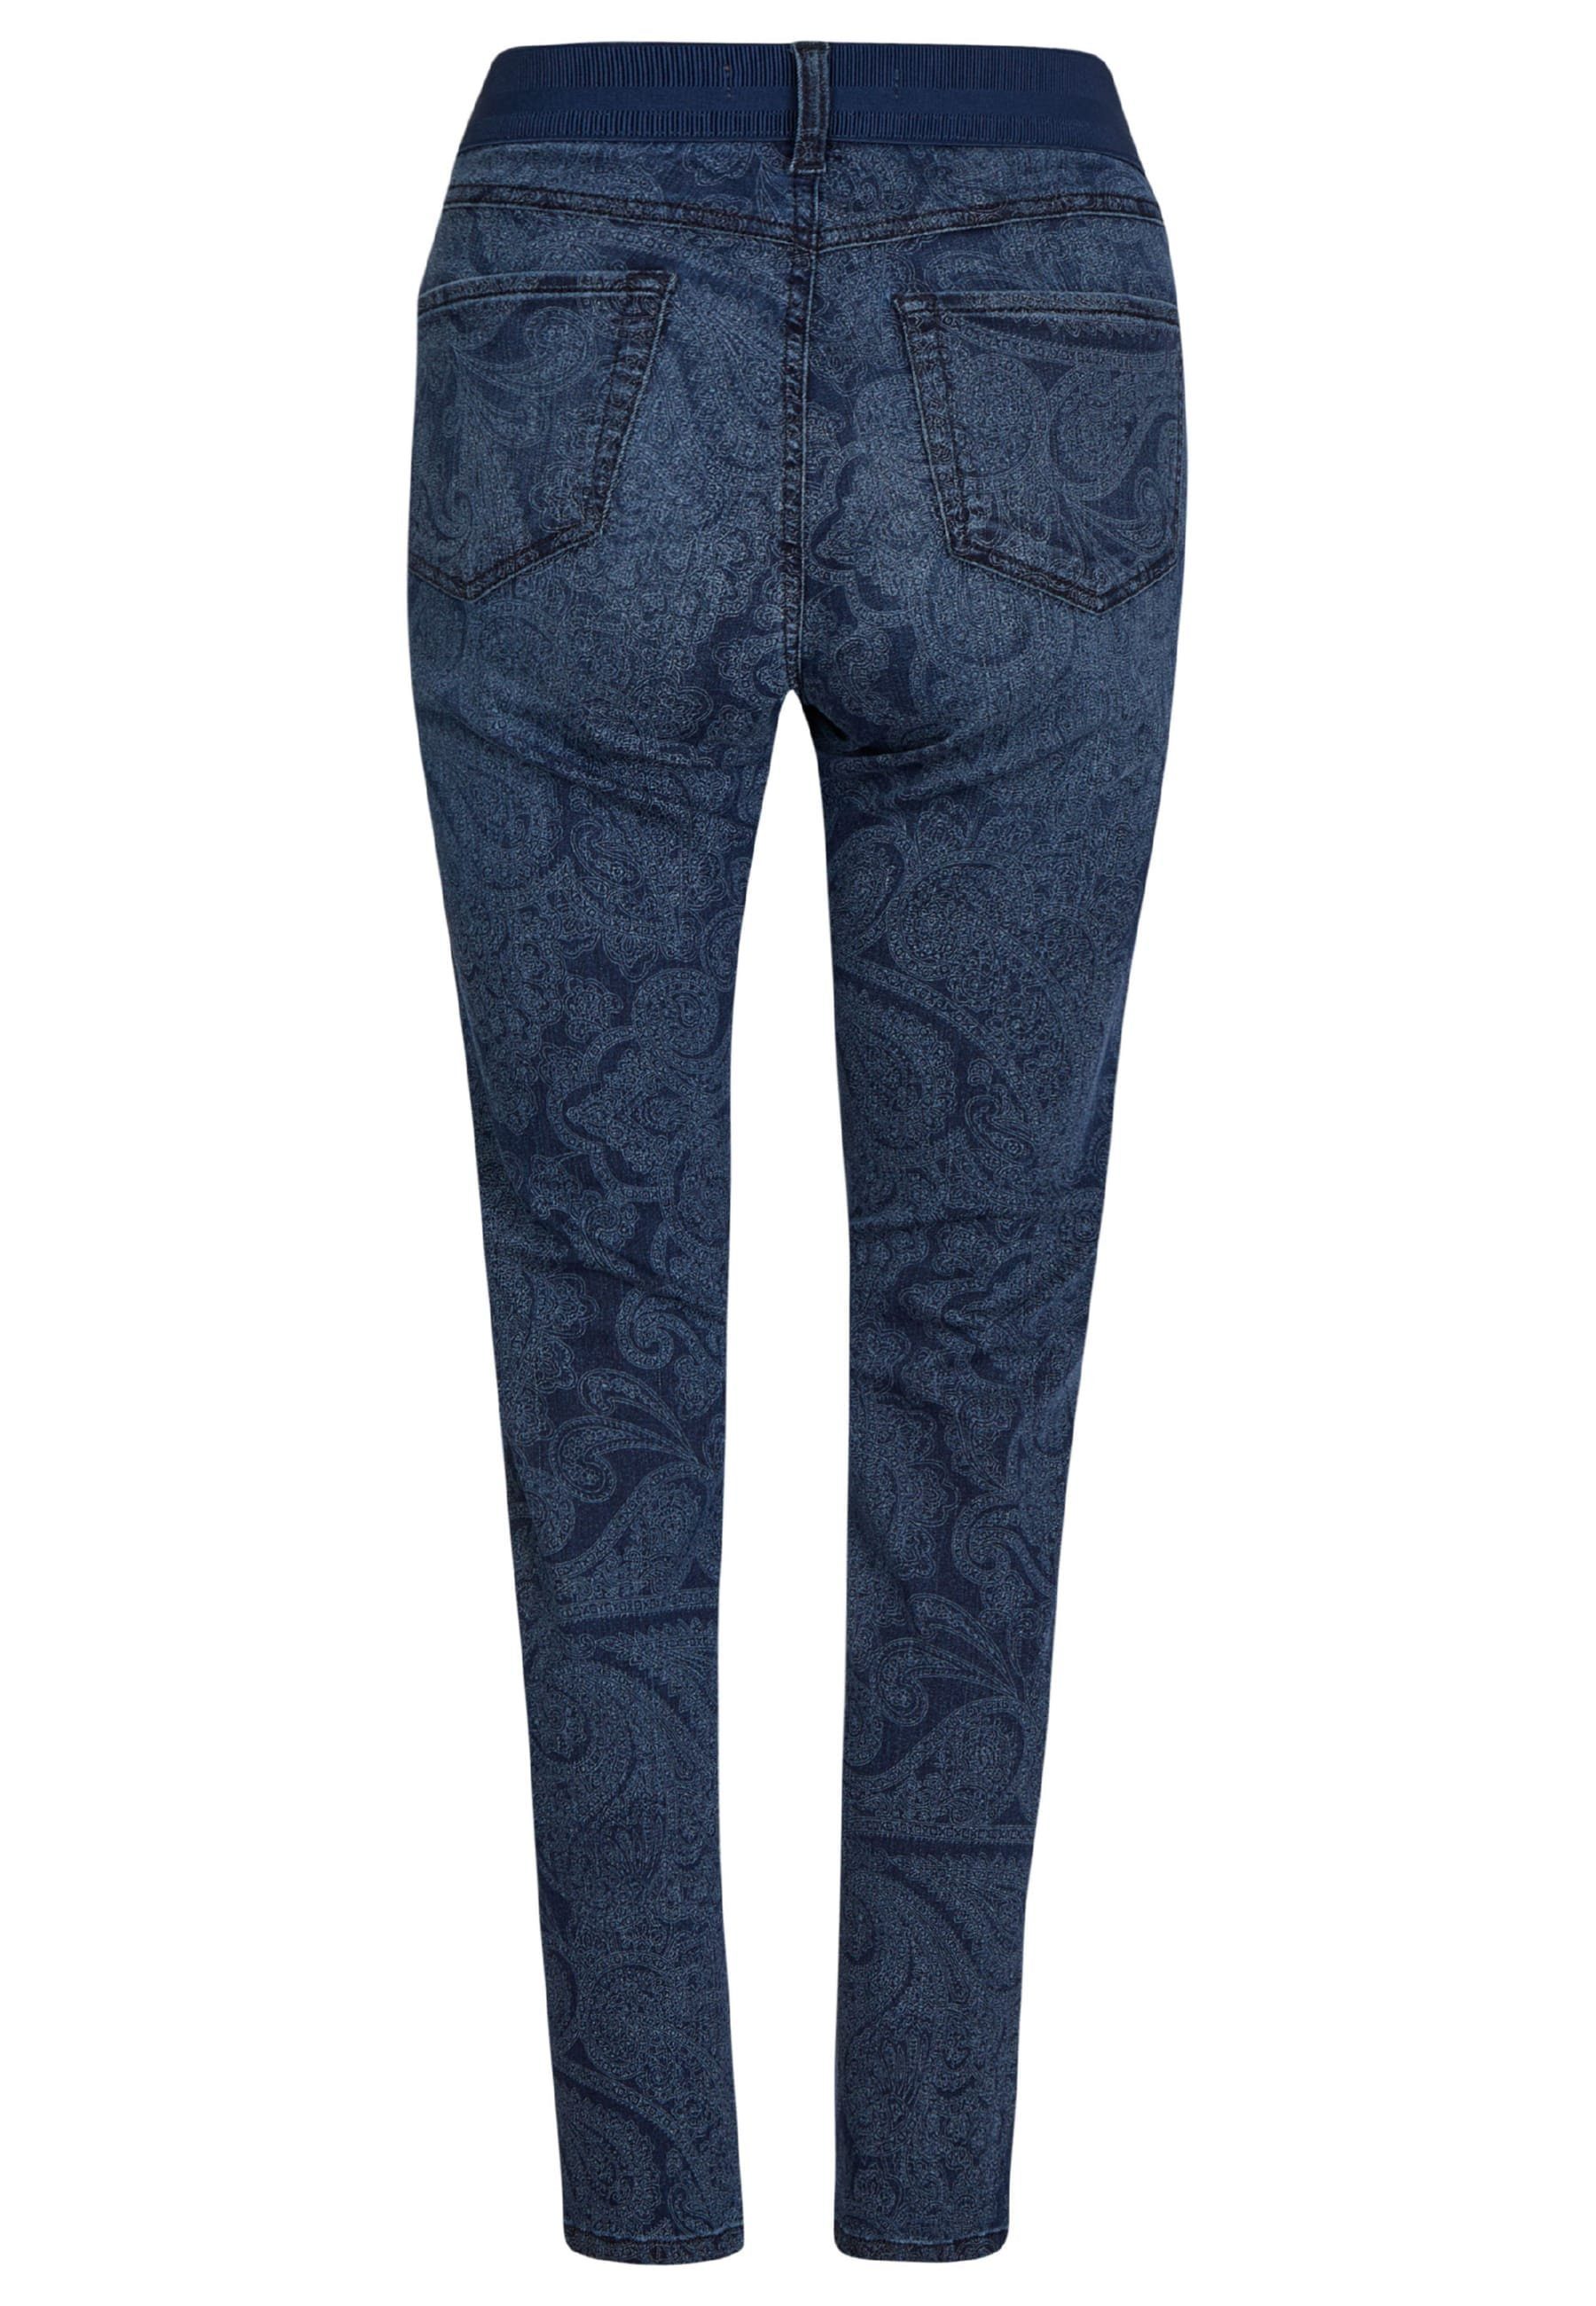 mit Slim-fit-Jeans mit ANGELS blue Label-Applikationen Paisley-Muster One Jeans Size